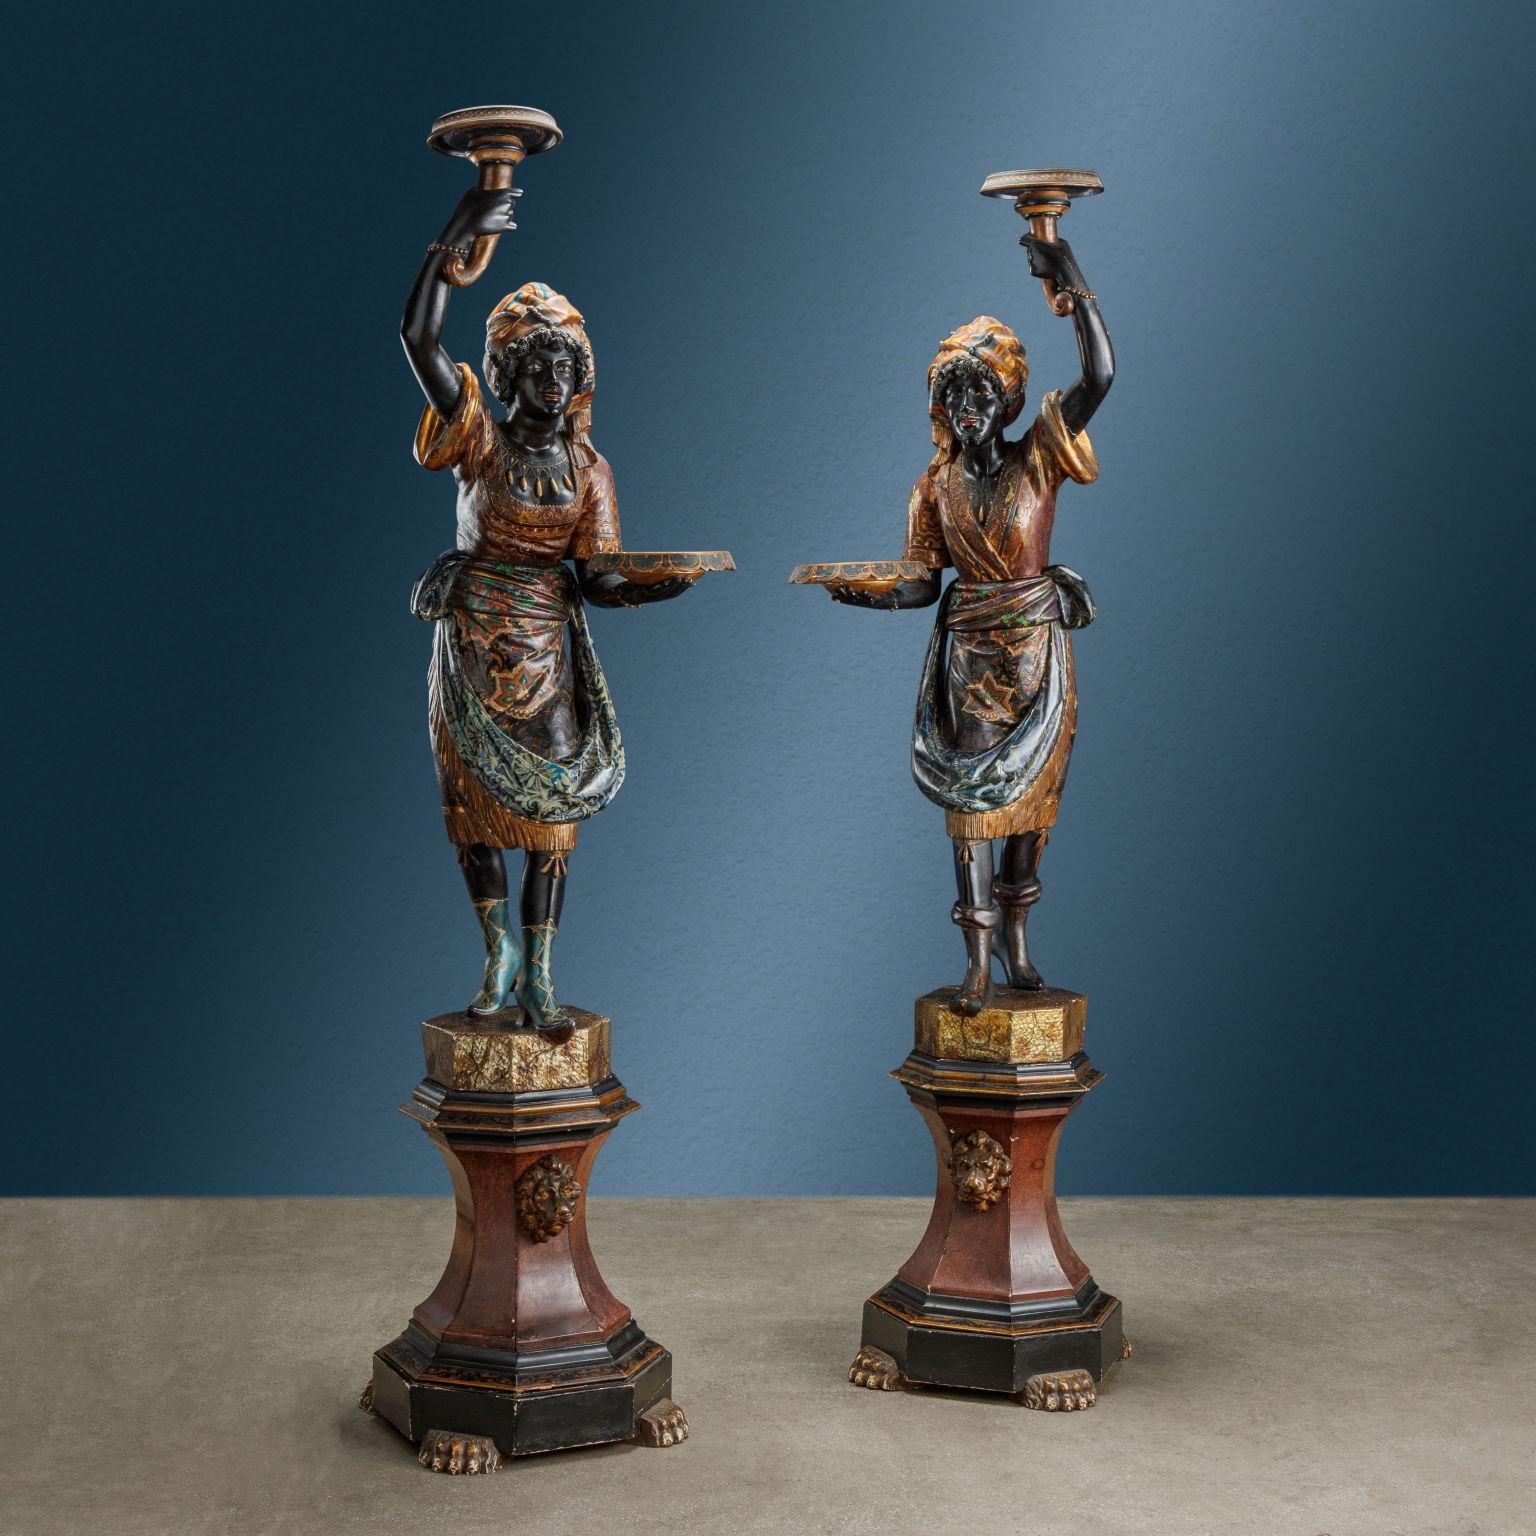 Pair of torch-holding sculptures depicting two Venetian Moors, one female figure and the other male. In a mirrored position of slight advancement, they hold a tray in one hand while in the other, raised above their heads, a cornucopia with